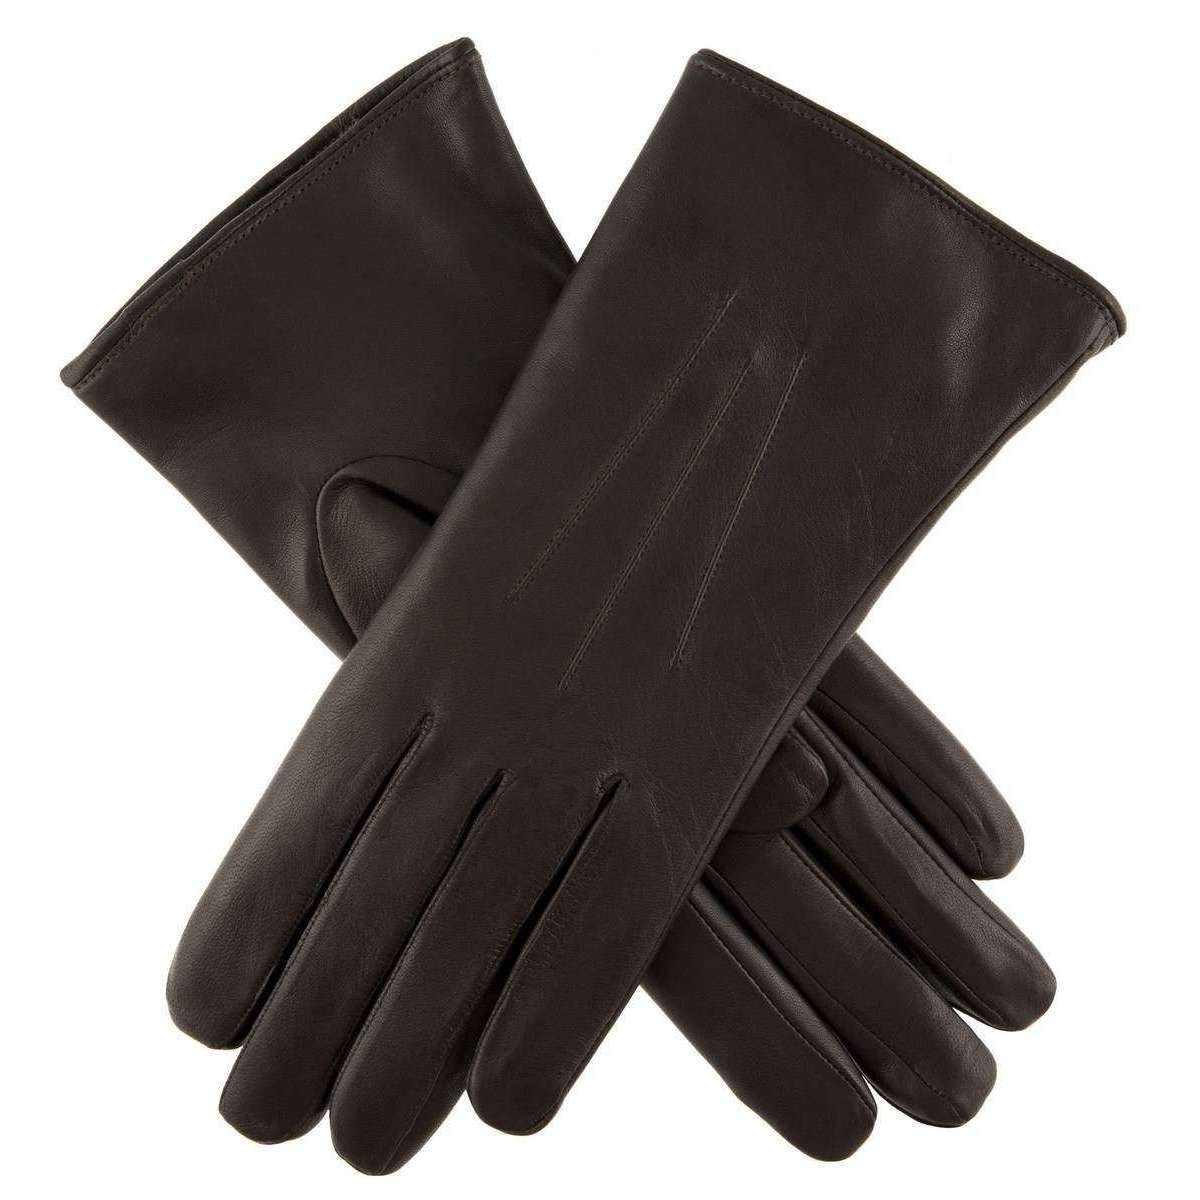 Dents Ripley Leather Gloves - Mocca Brown/Brown